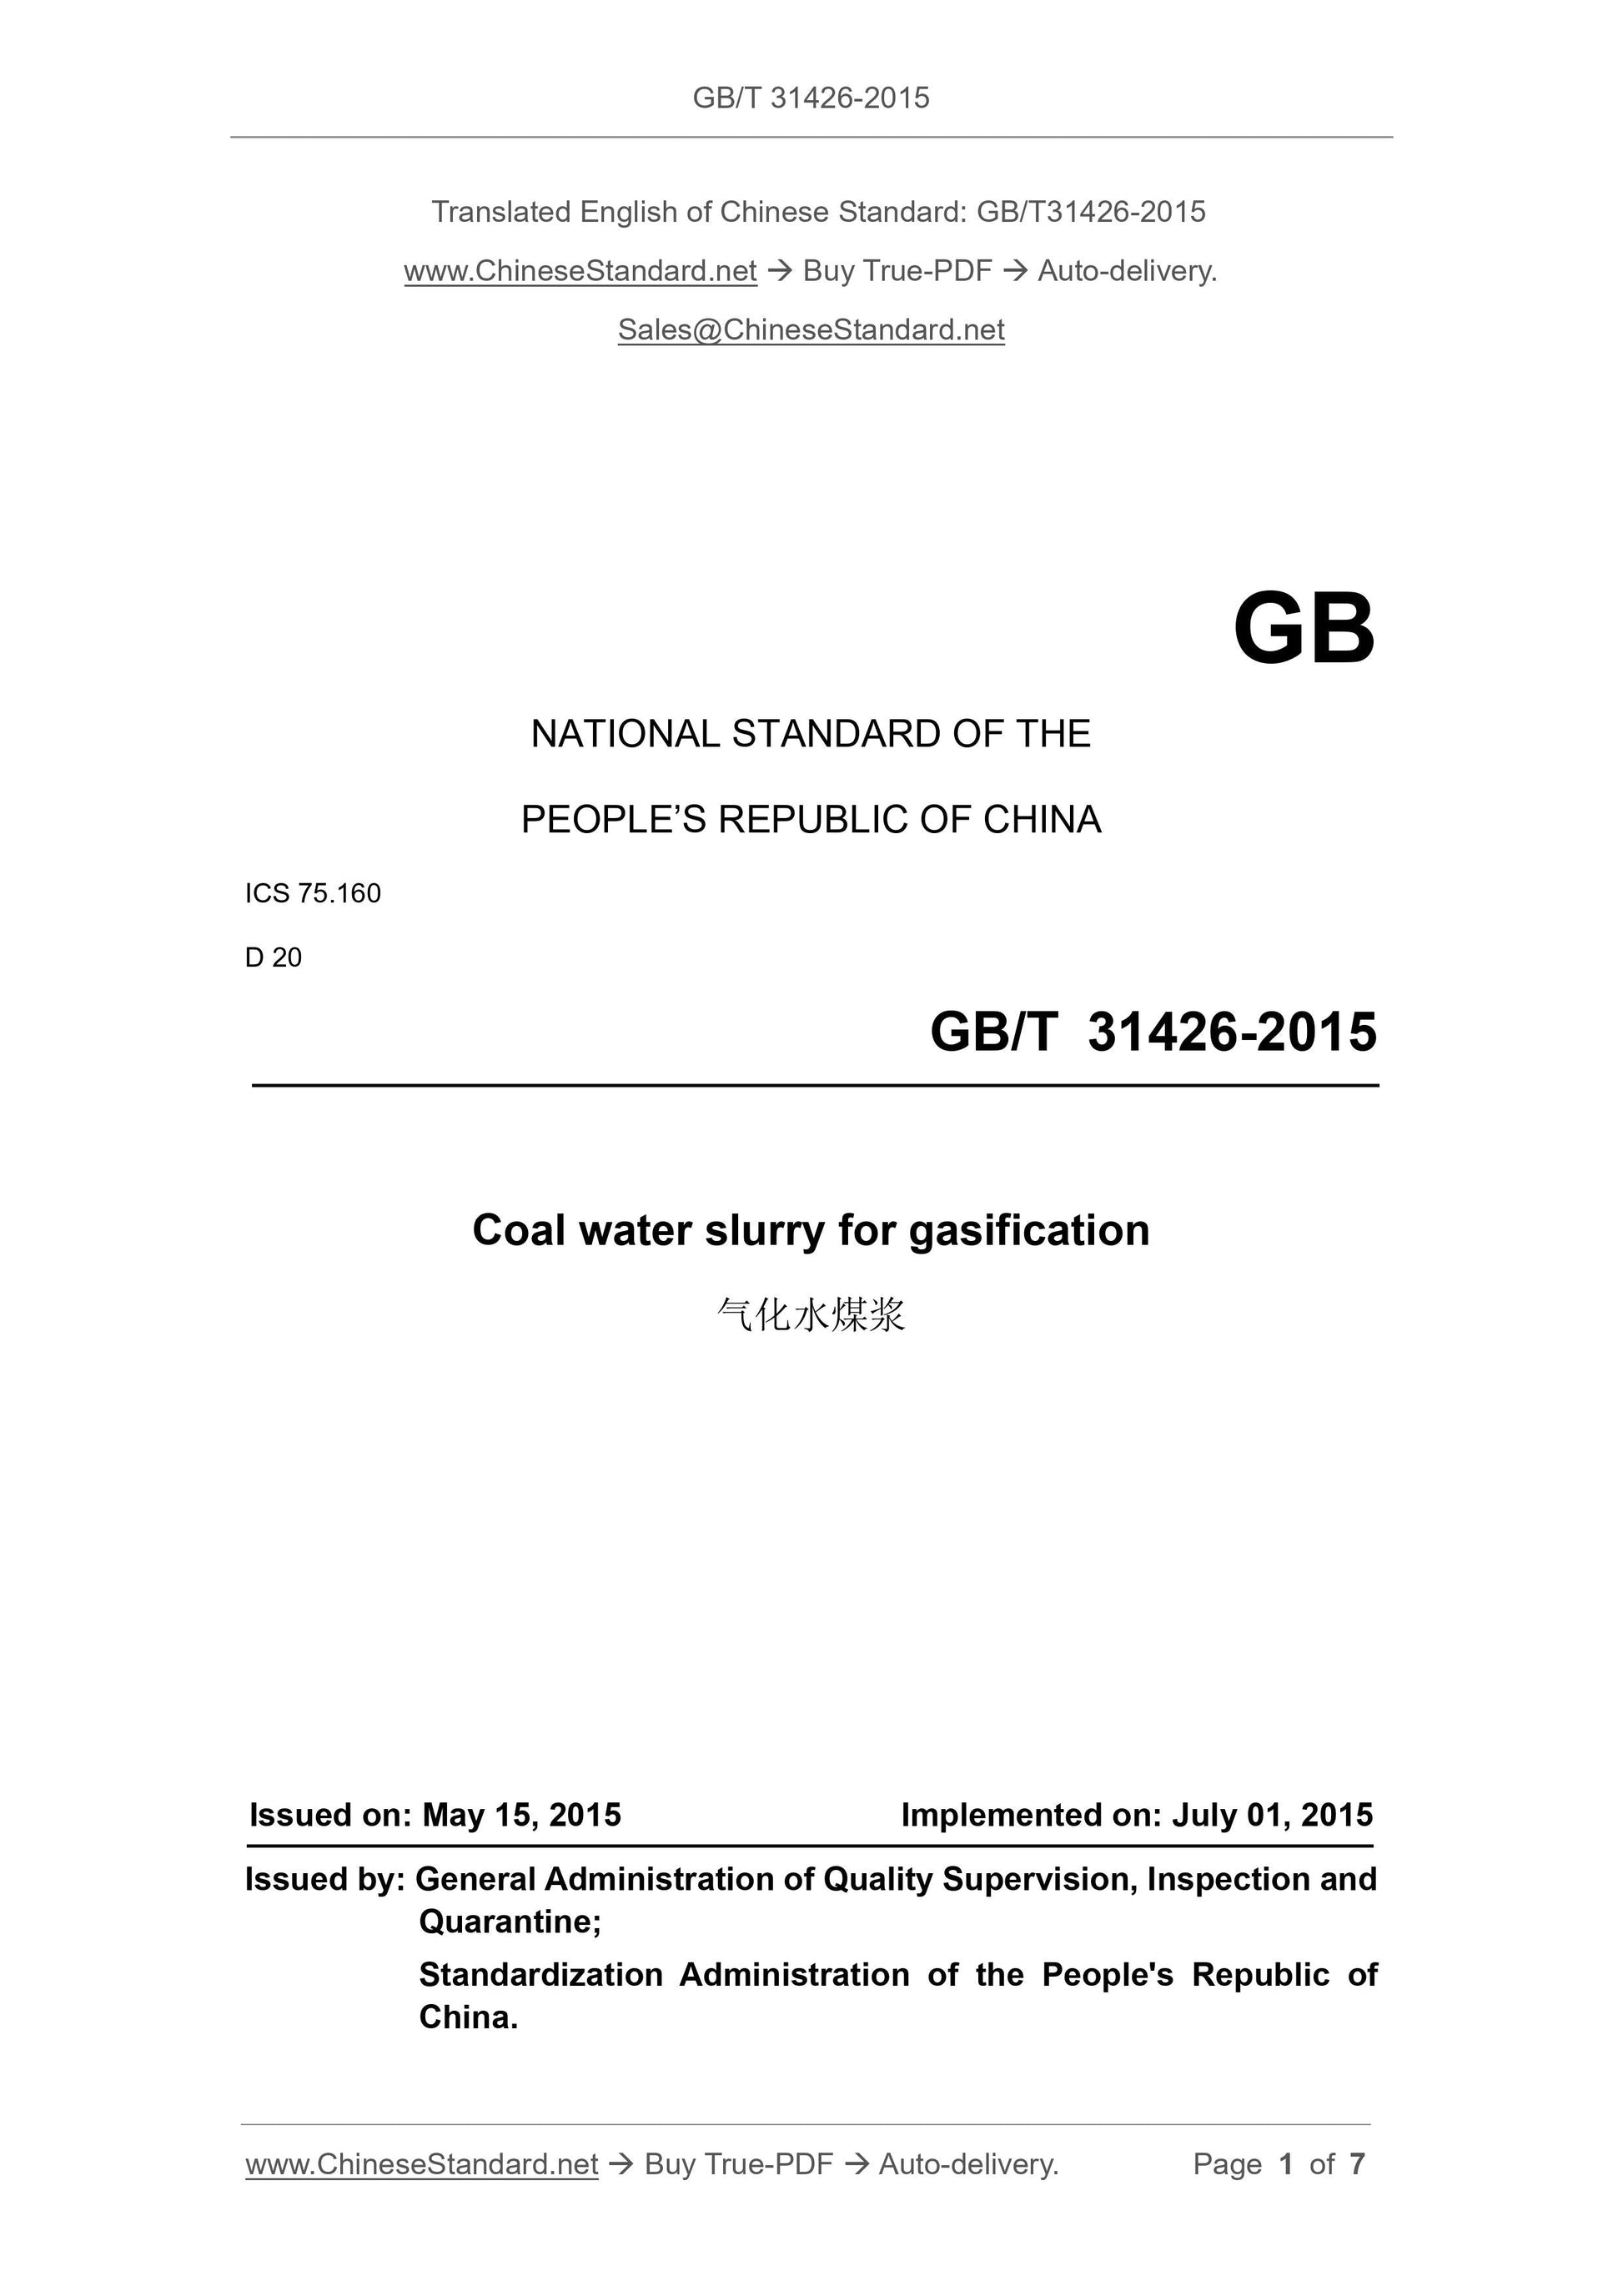 GB/T 31426-2015 Page 1